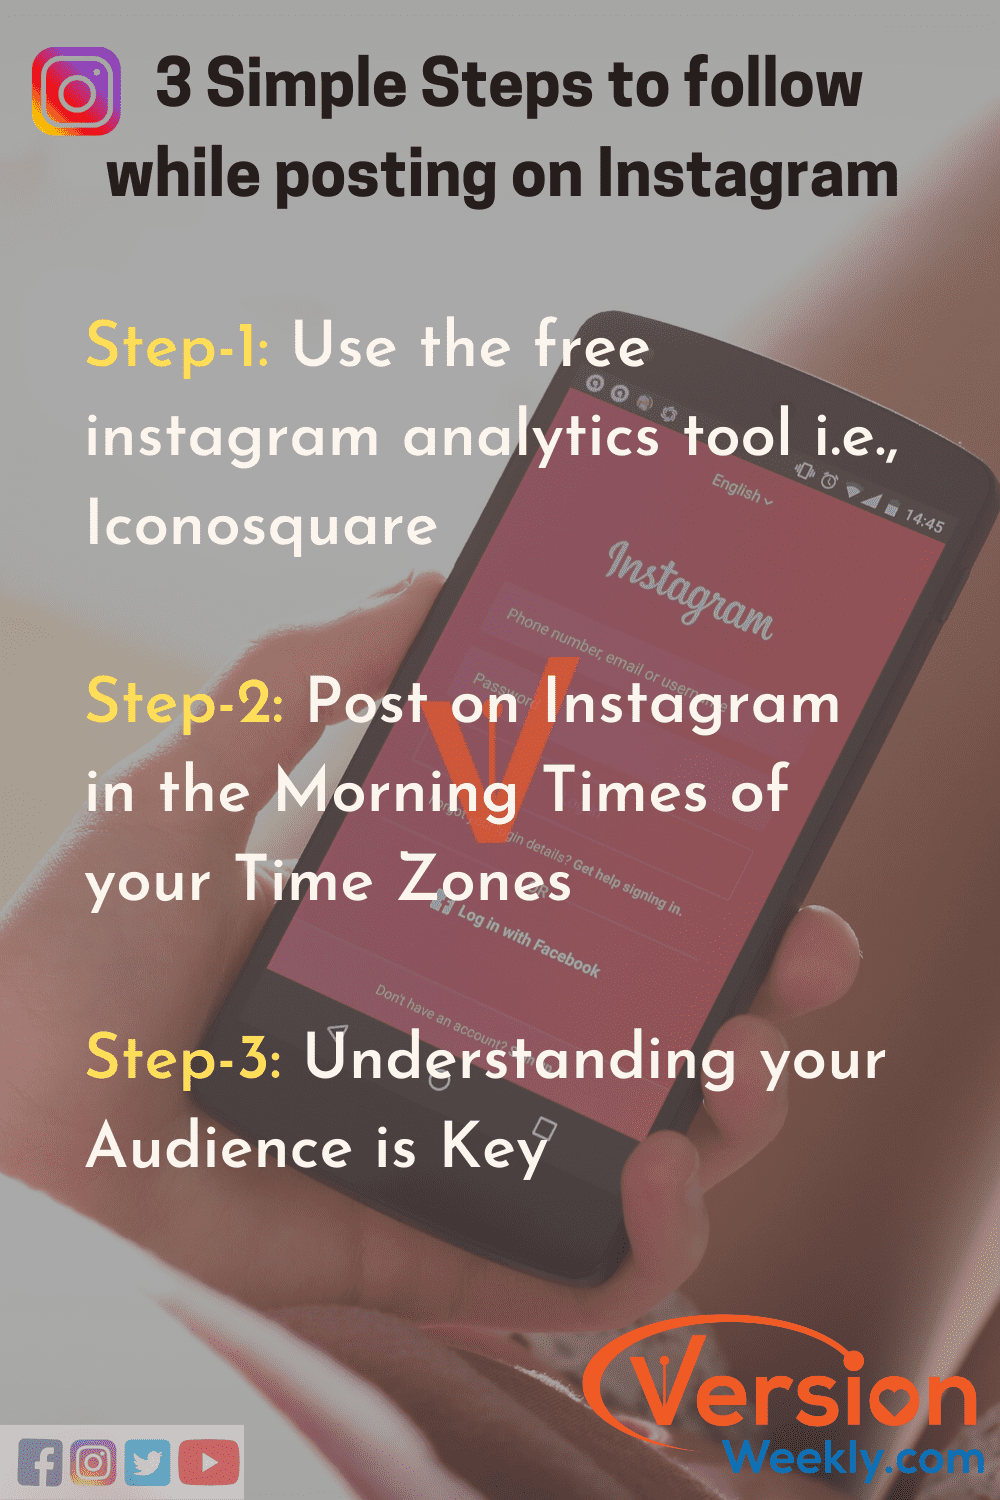 Steps to findout best times to post on Instagram